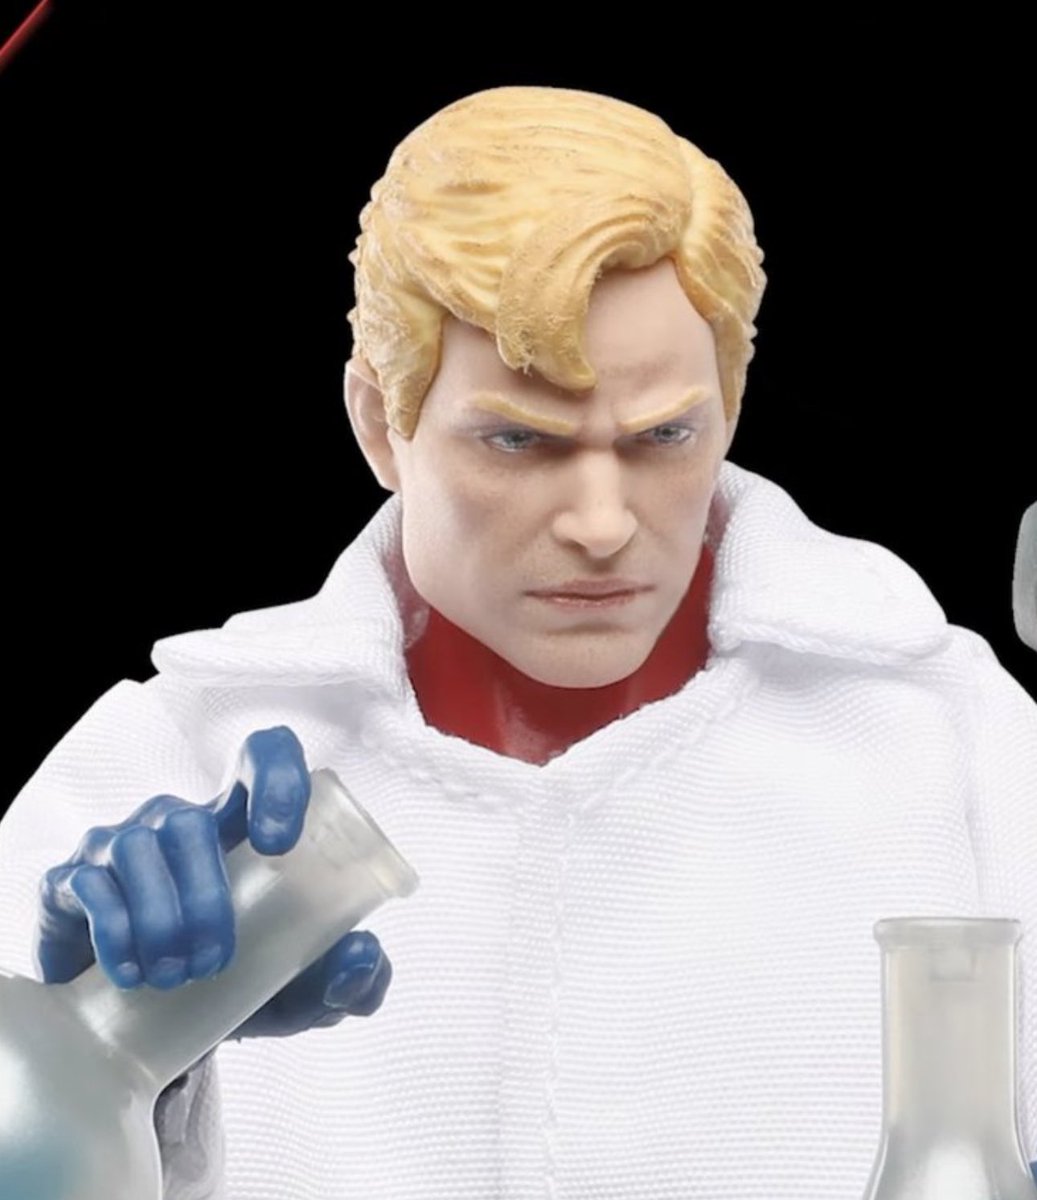 My Hank Pym head sculpt is reissued here with updated paint apps.